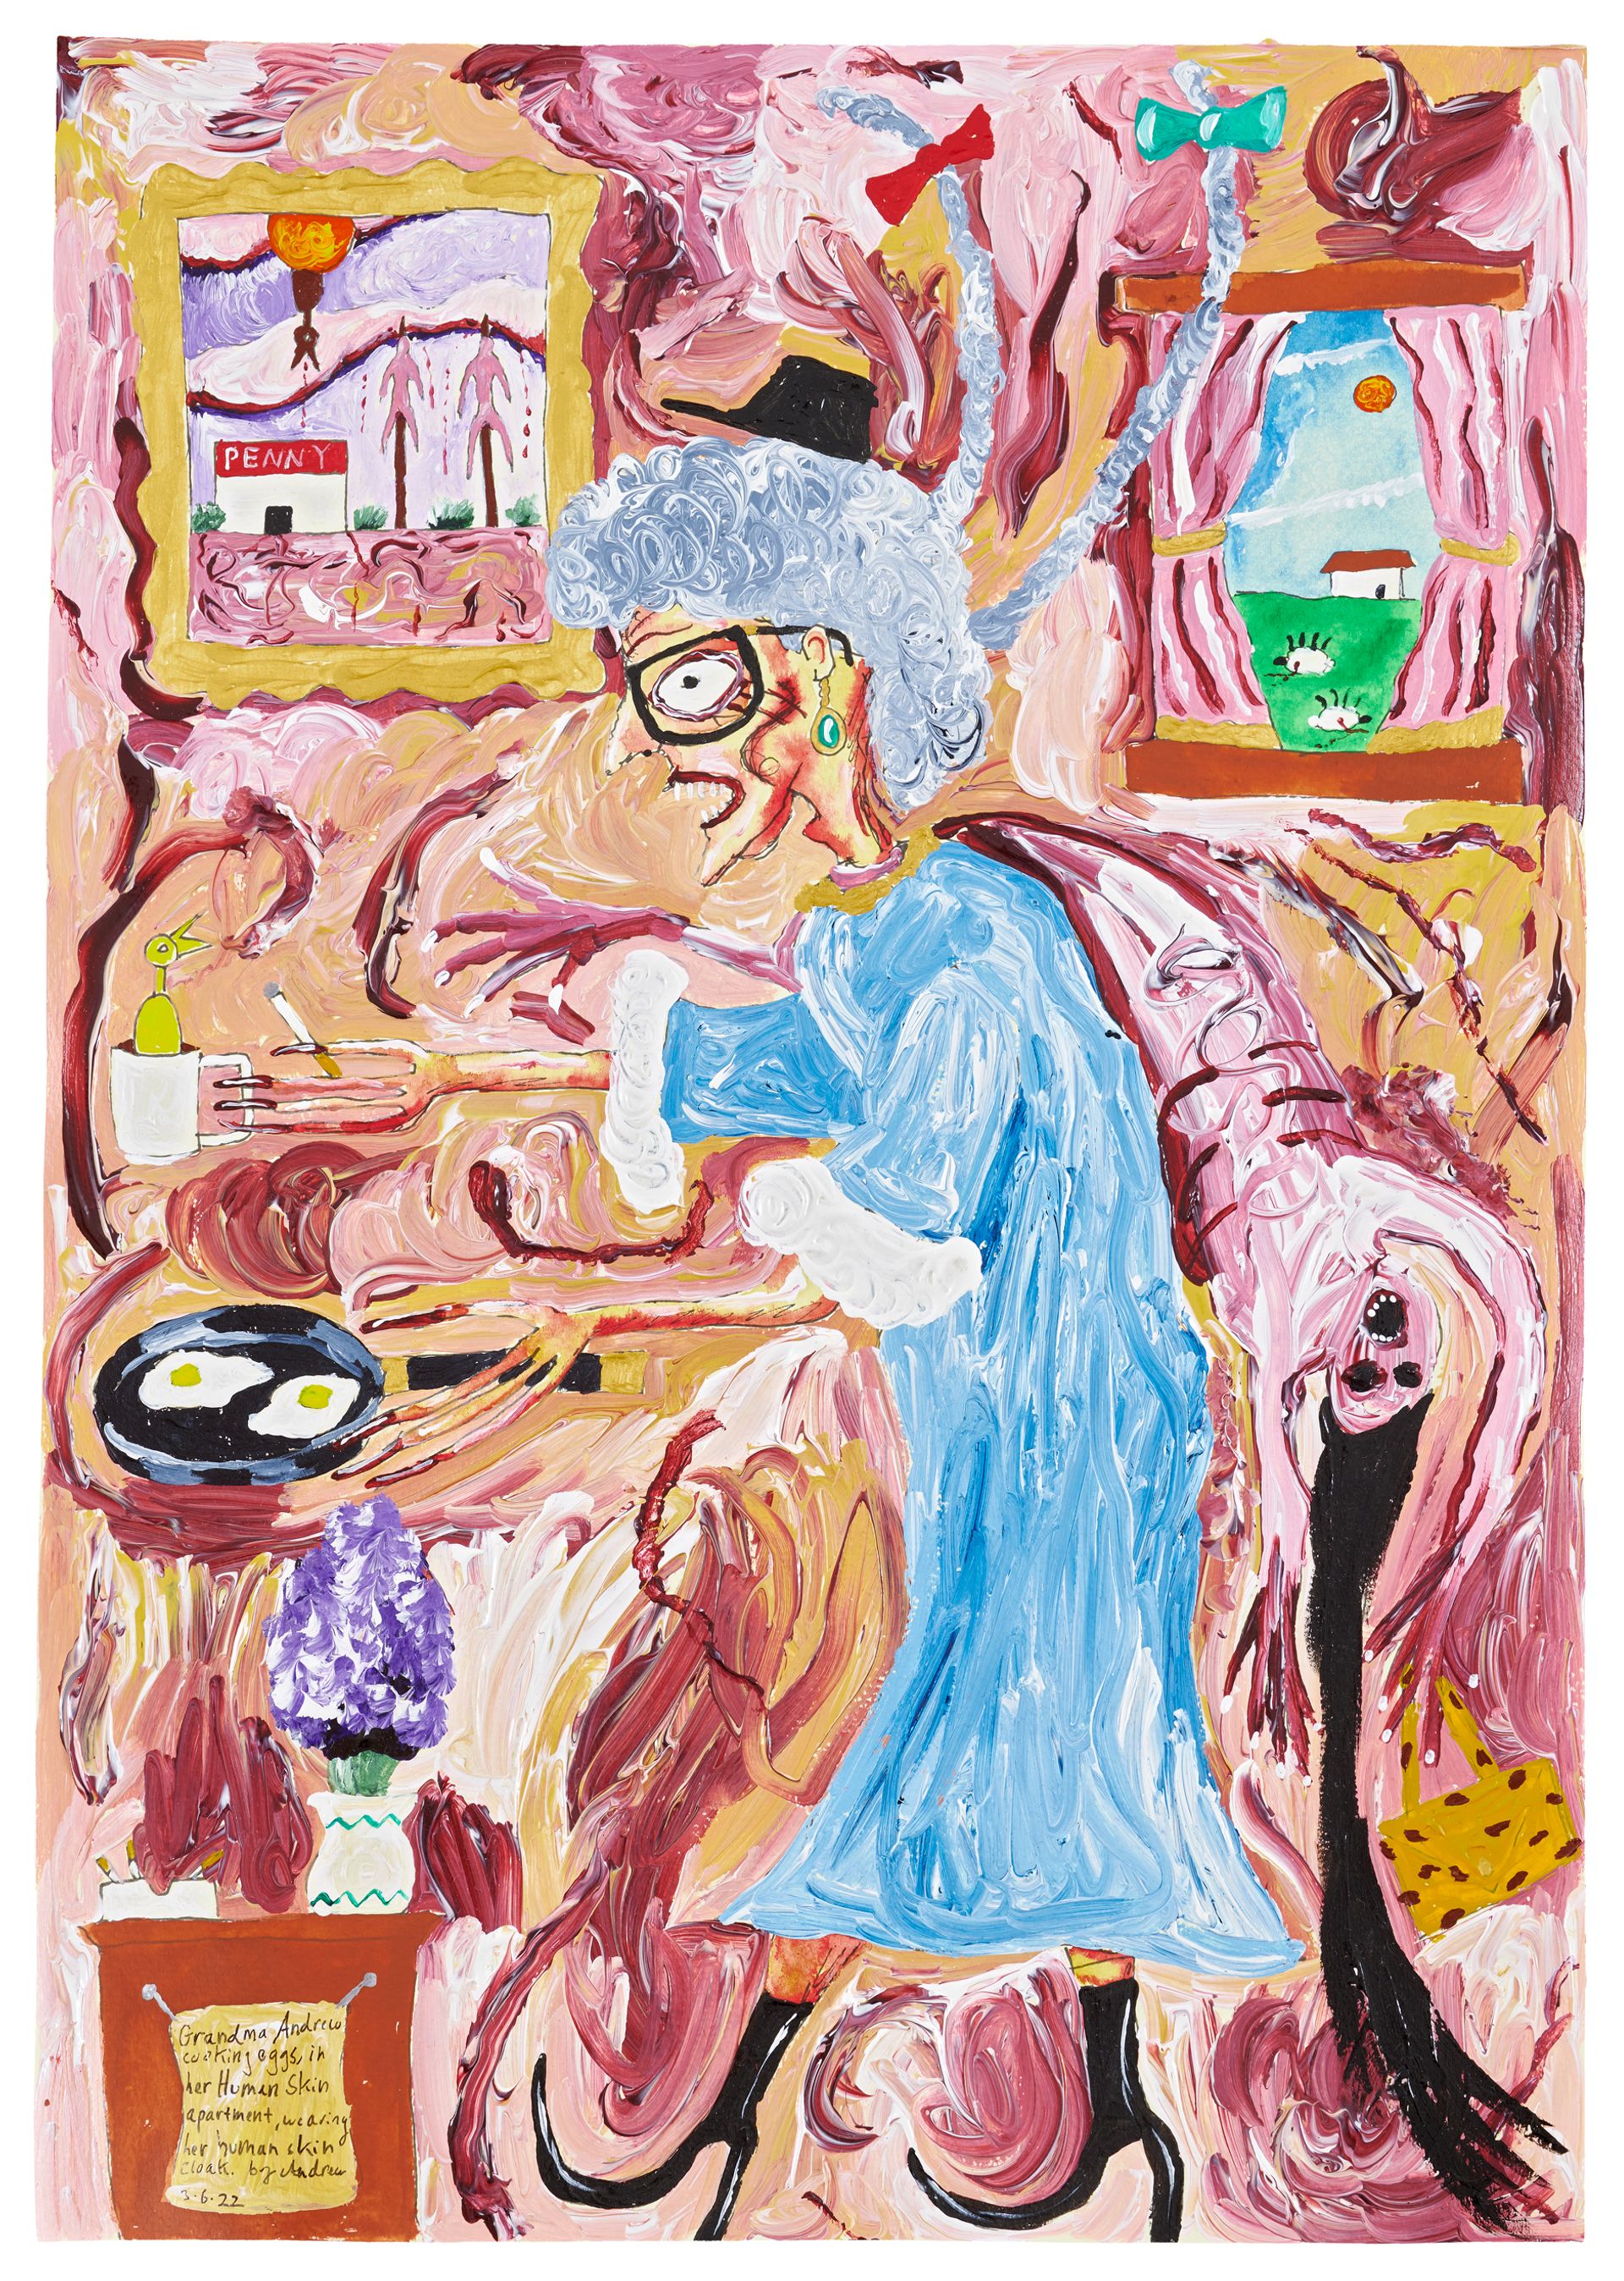 Andrew Gilbert, 'Grandma Andrew cooking eggs, in her Human Skin apartment, wearing her human skin cloak', 2022, acrylic, watercolor and fineliner on paper, 42 x 30 cm